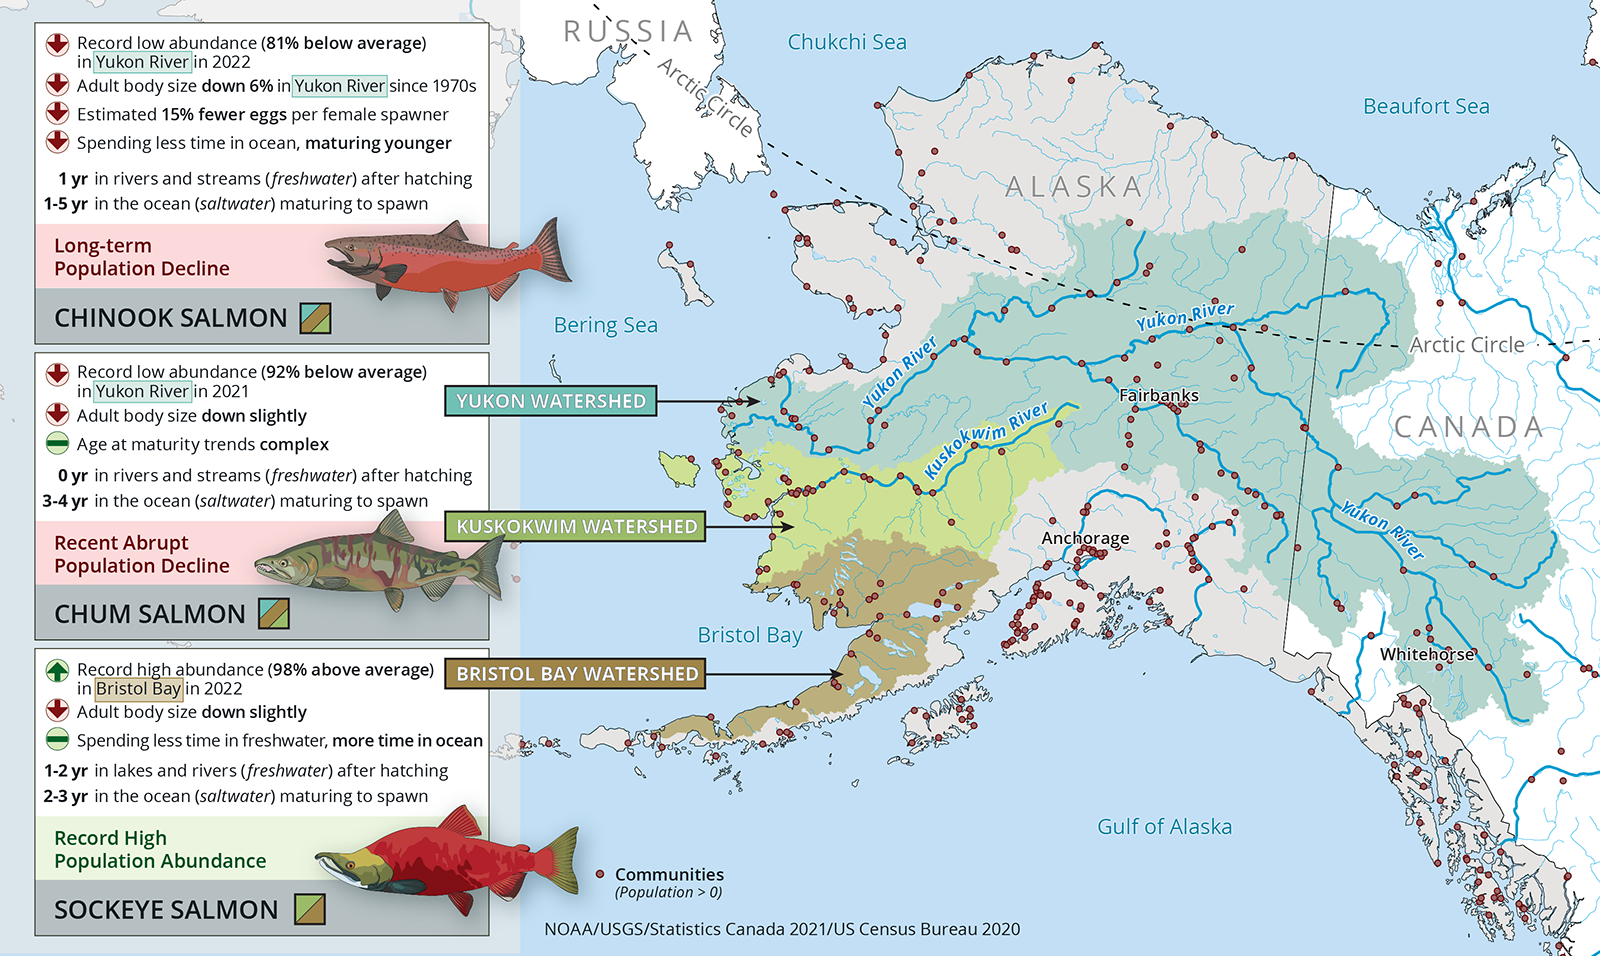 Divergent Responses of Western Alaska Salmon to a Changing Climate